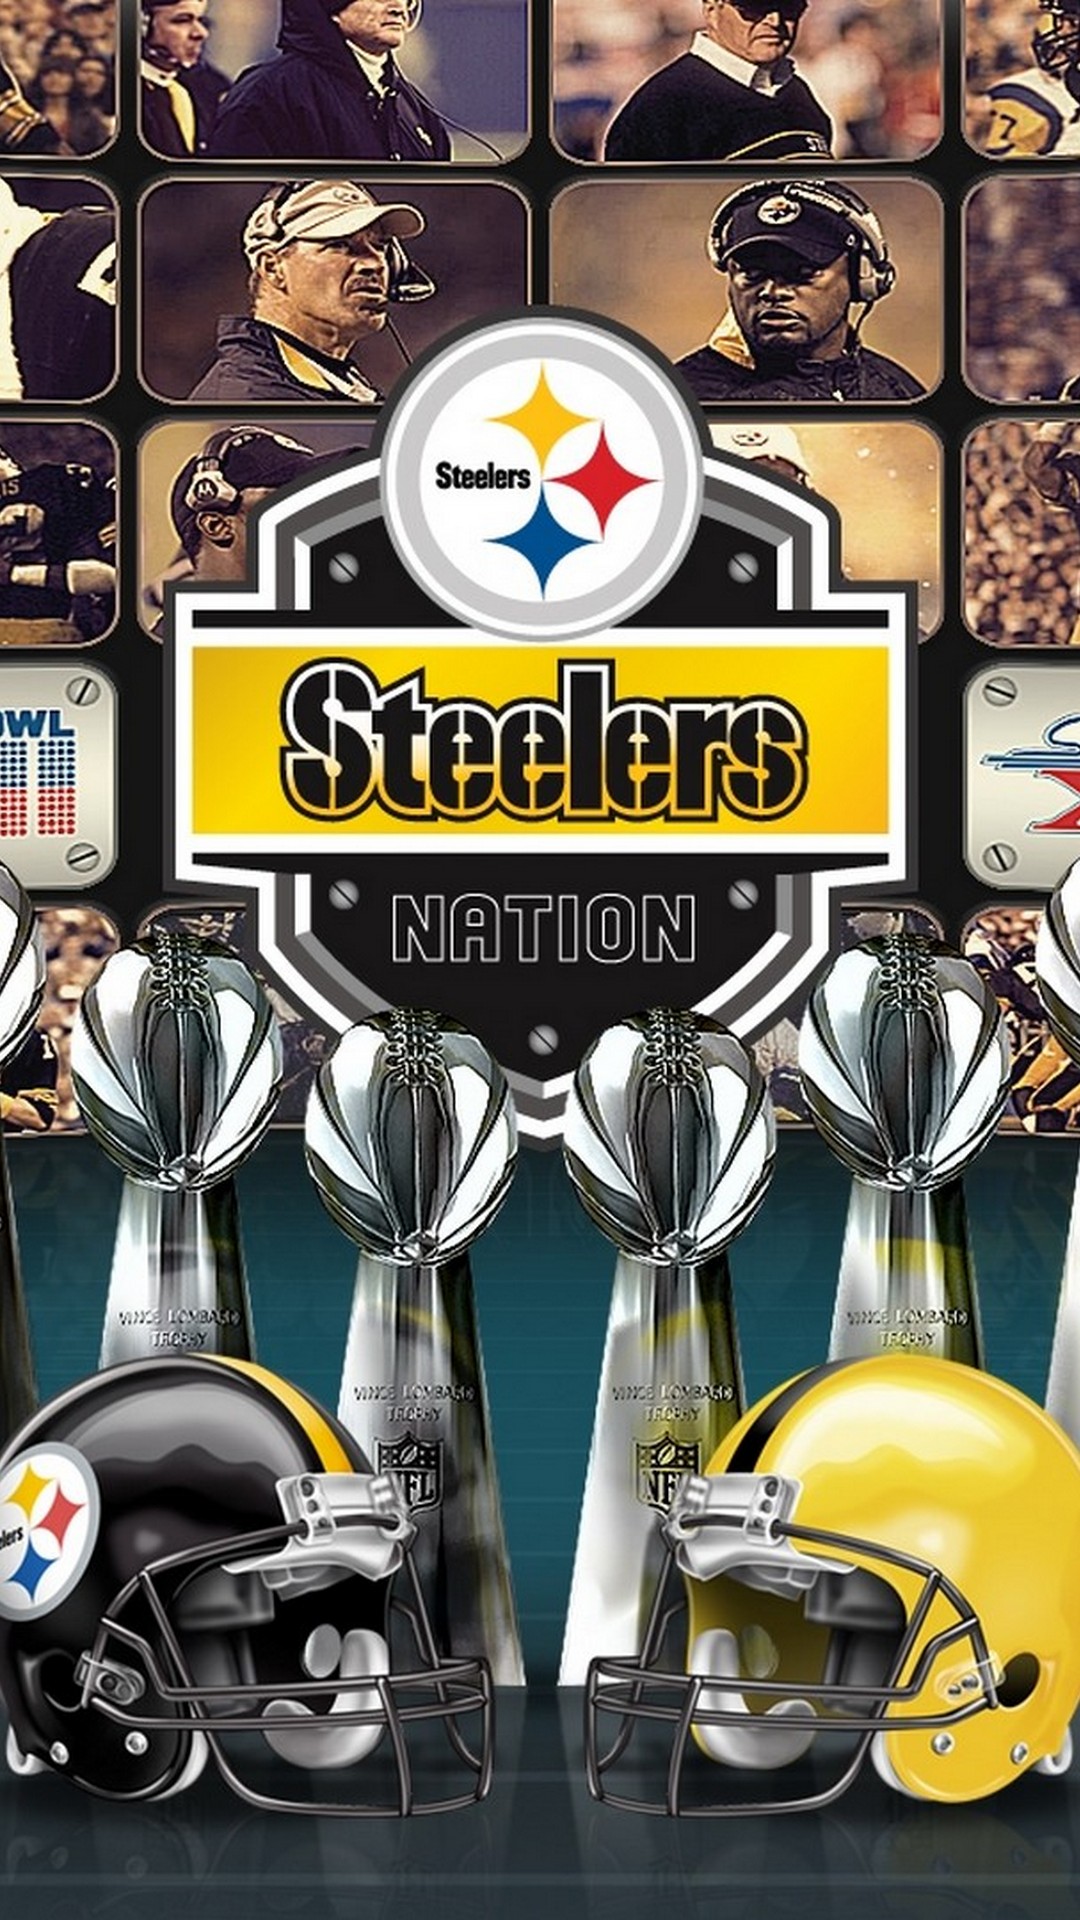 Pittsburgh Steelers HD Wallpaper For iPhone with high-resolution 1080x1920 pixel. You can use this wallpaper for your Mac or Windows Desktop Background, iPhone, Android or Tablet and another Smartphone device